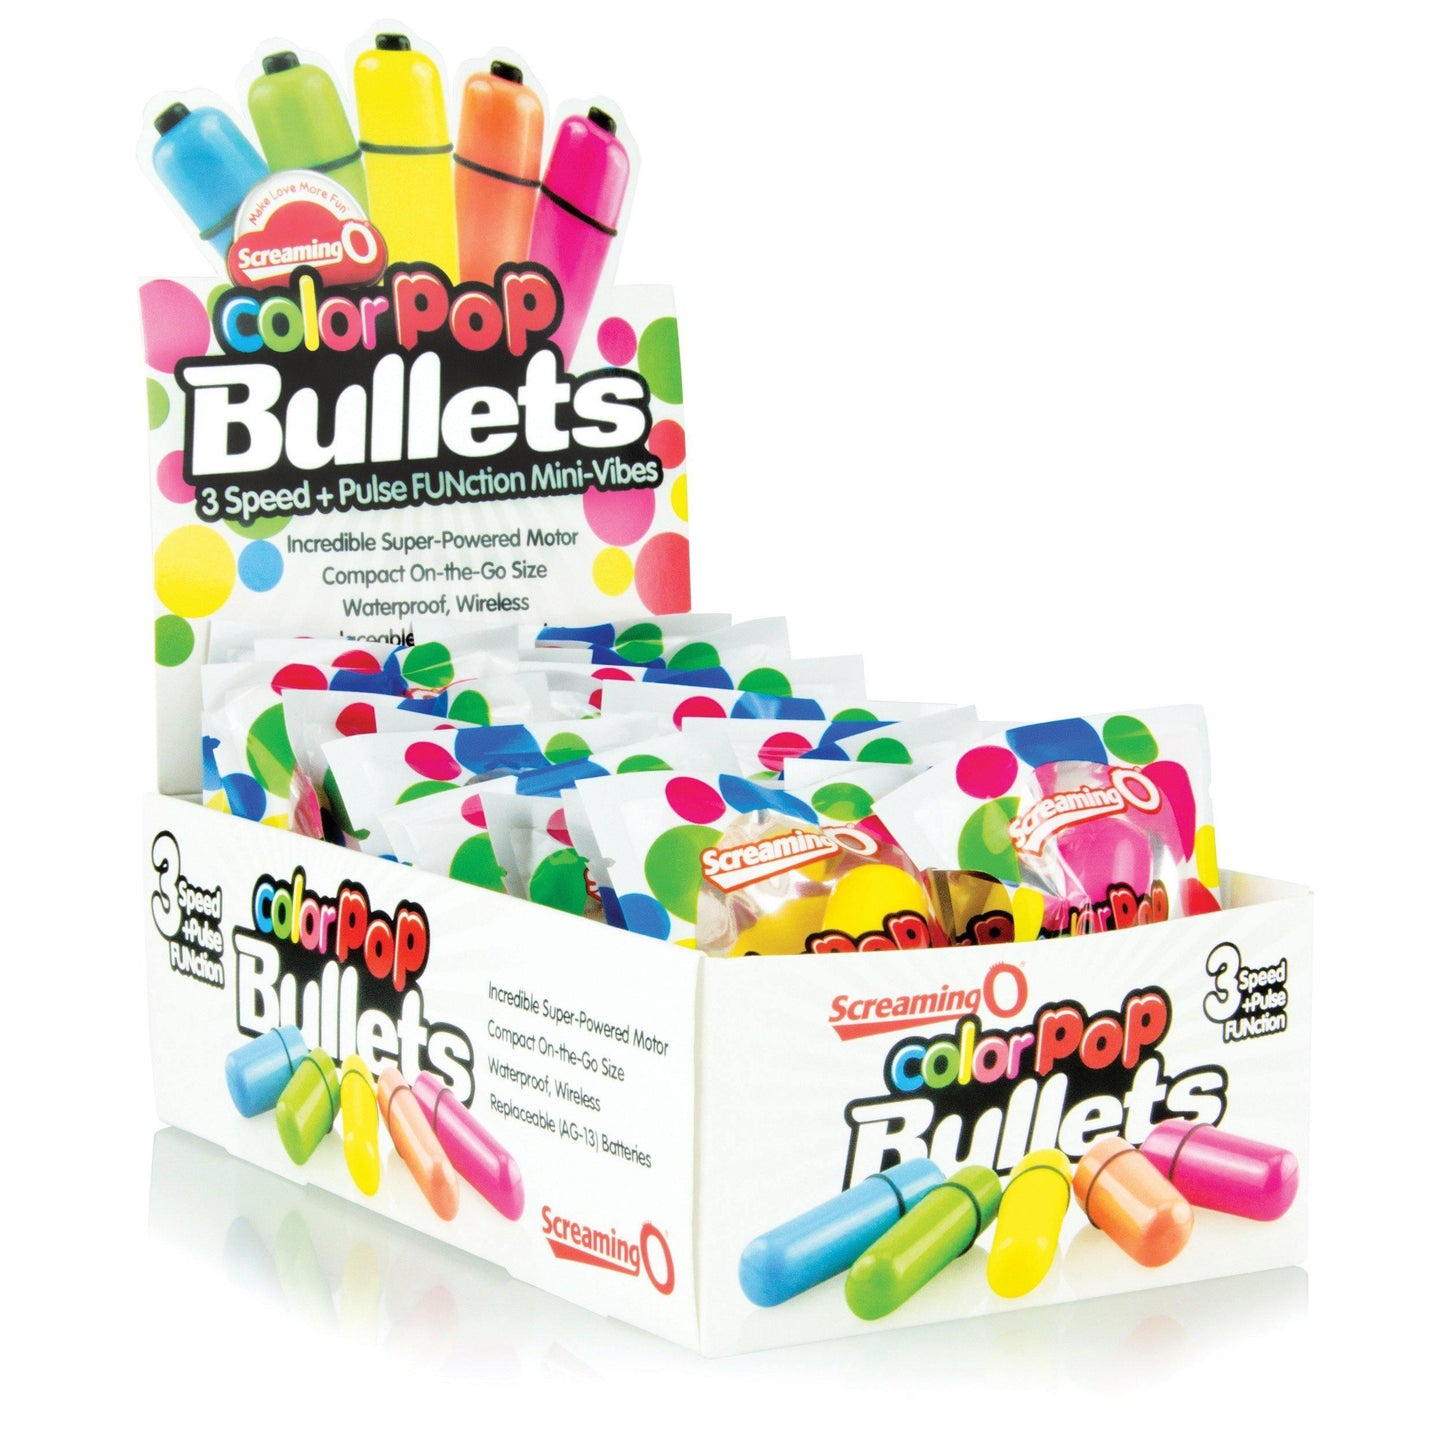 Colorpop Bullets - 20 Count P.O.P. Box Display - Assorted - My Sex Toy Hub